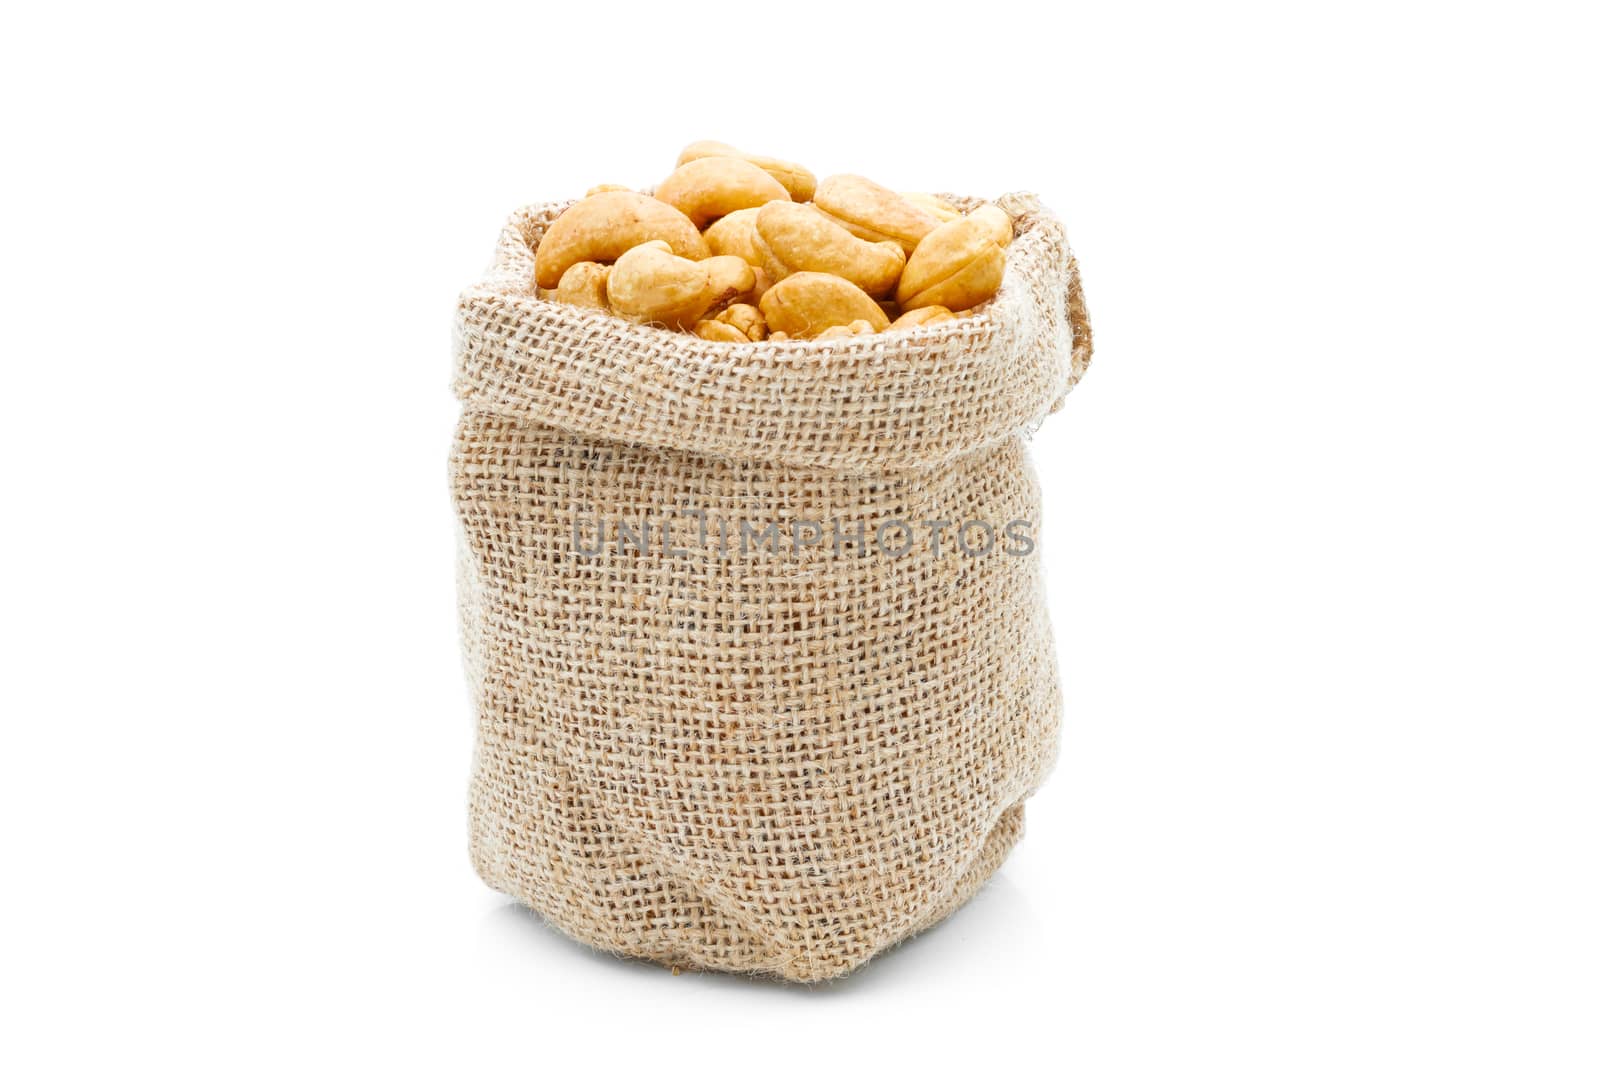 Cashews in a sack on a white background